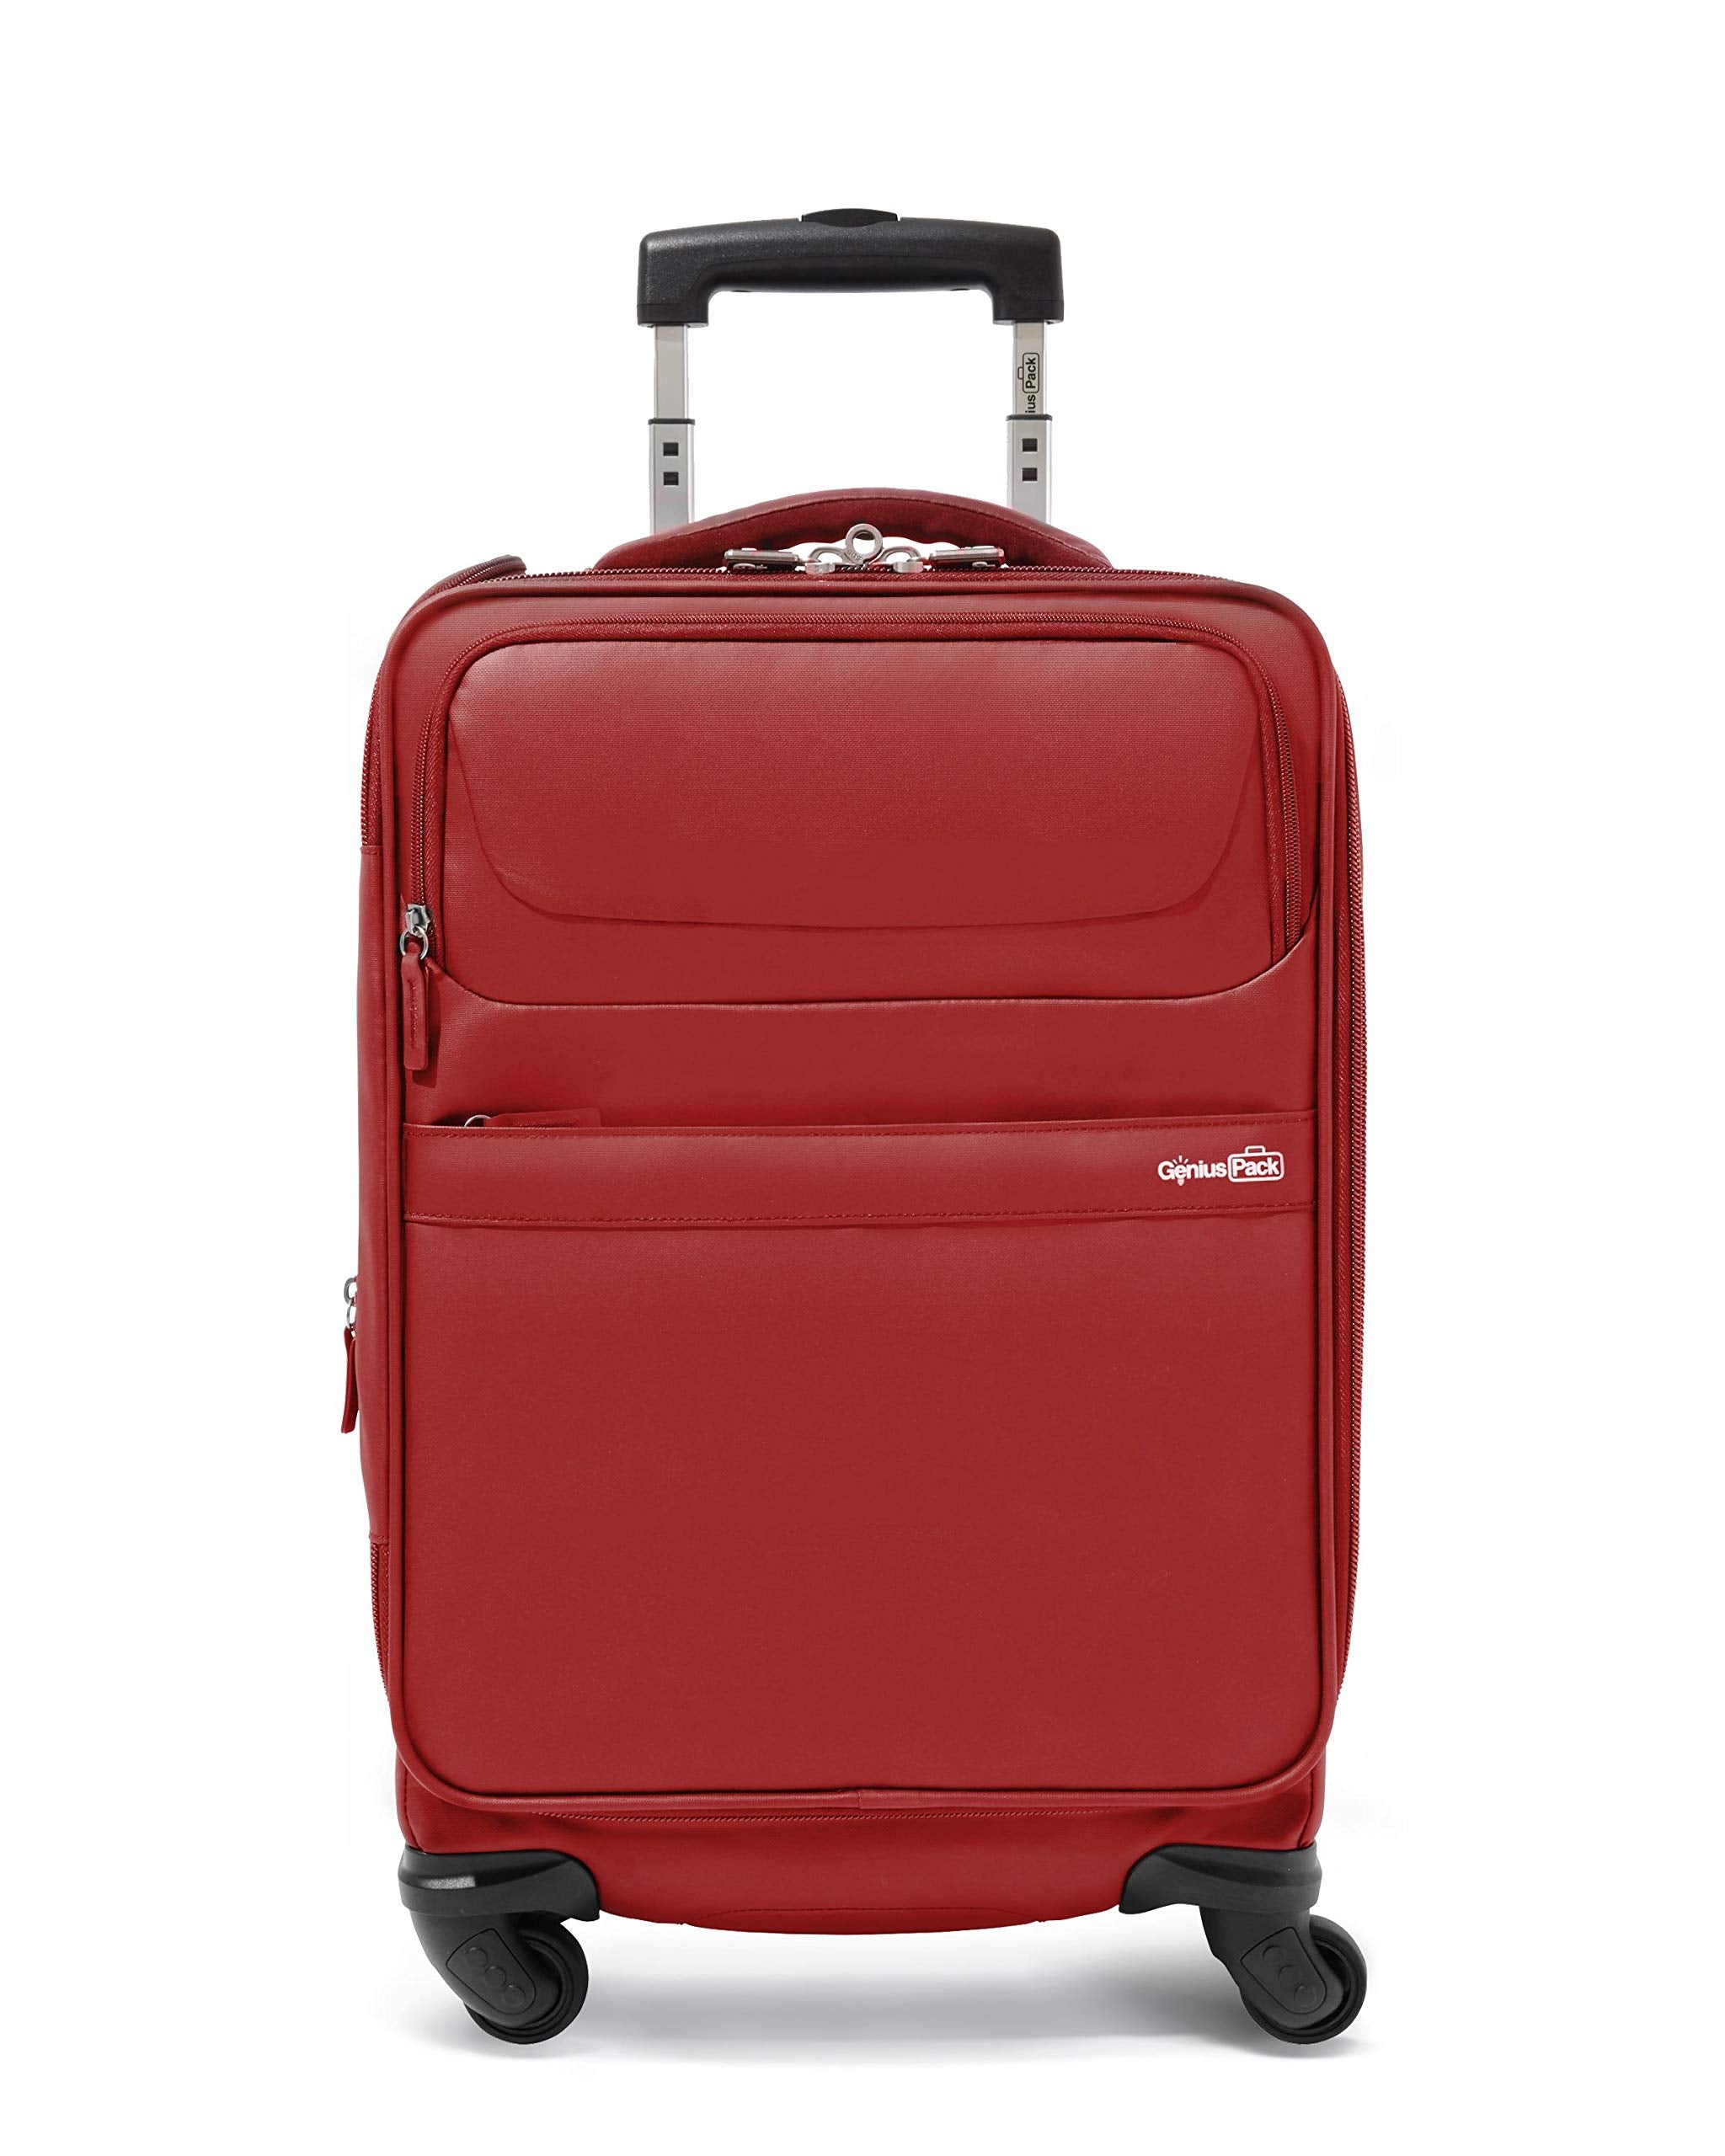 Pack G4 22" Carry-On Luggage Luggage Online